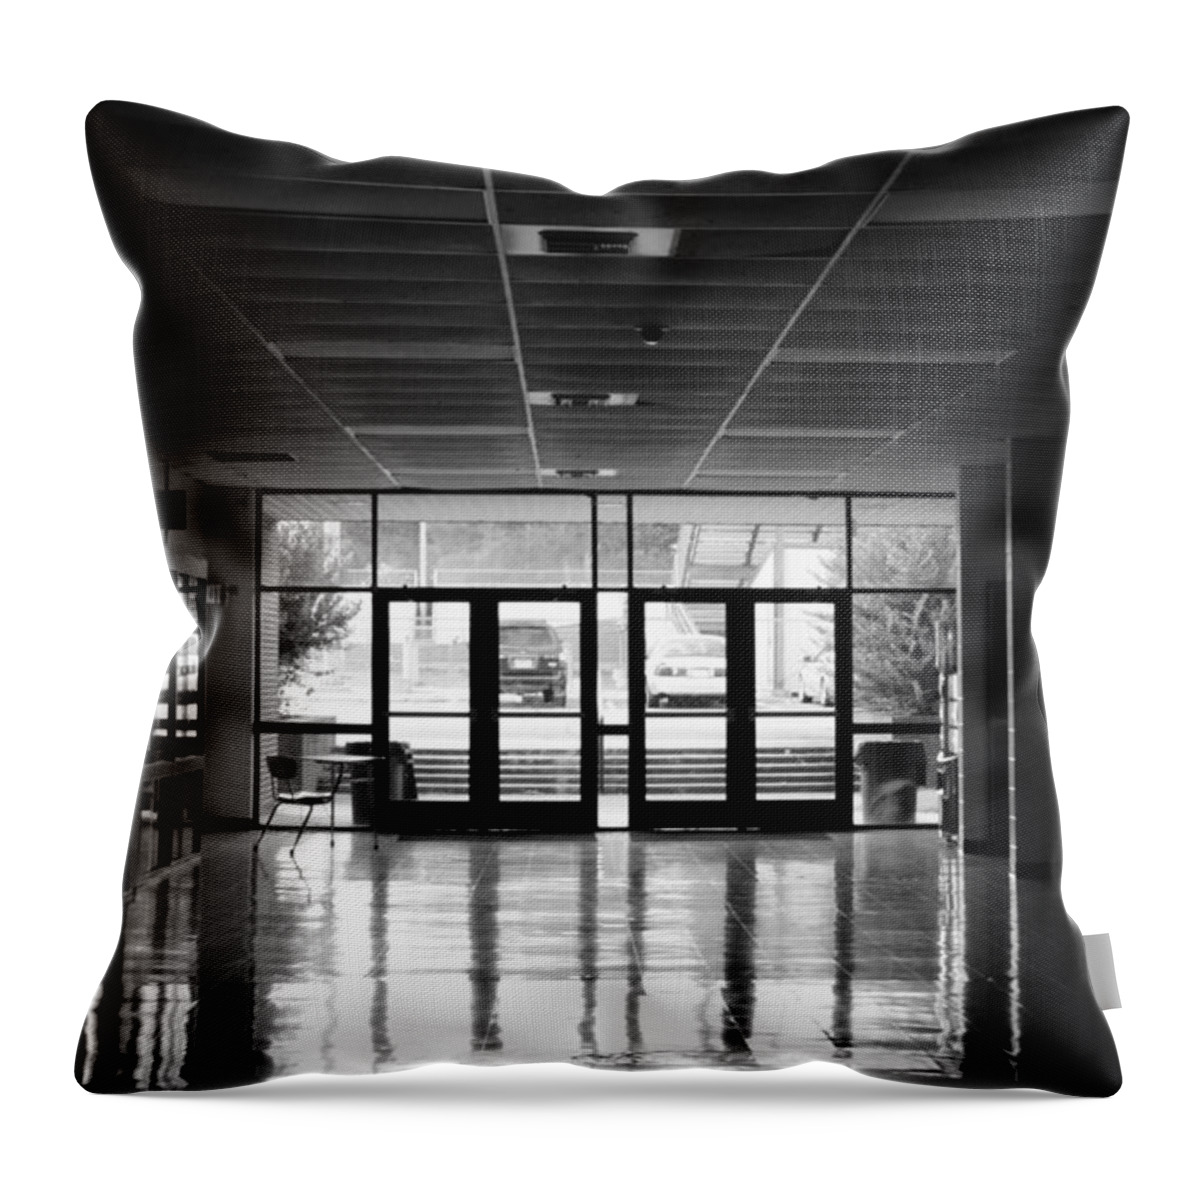 Black And White Throw Pillow featuring the photograph Lost by Jordan Barnes